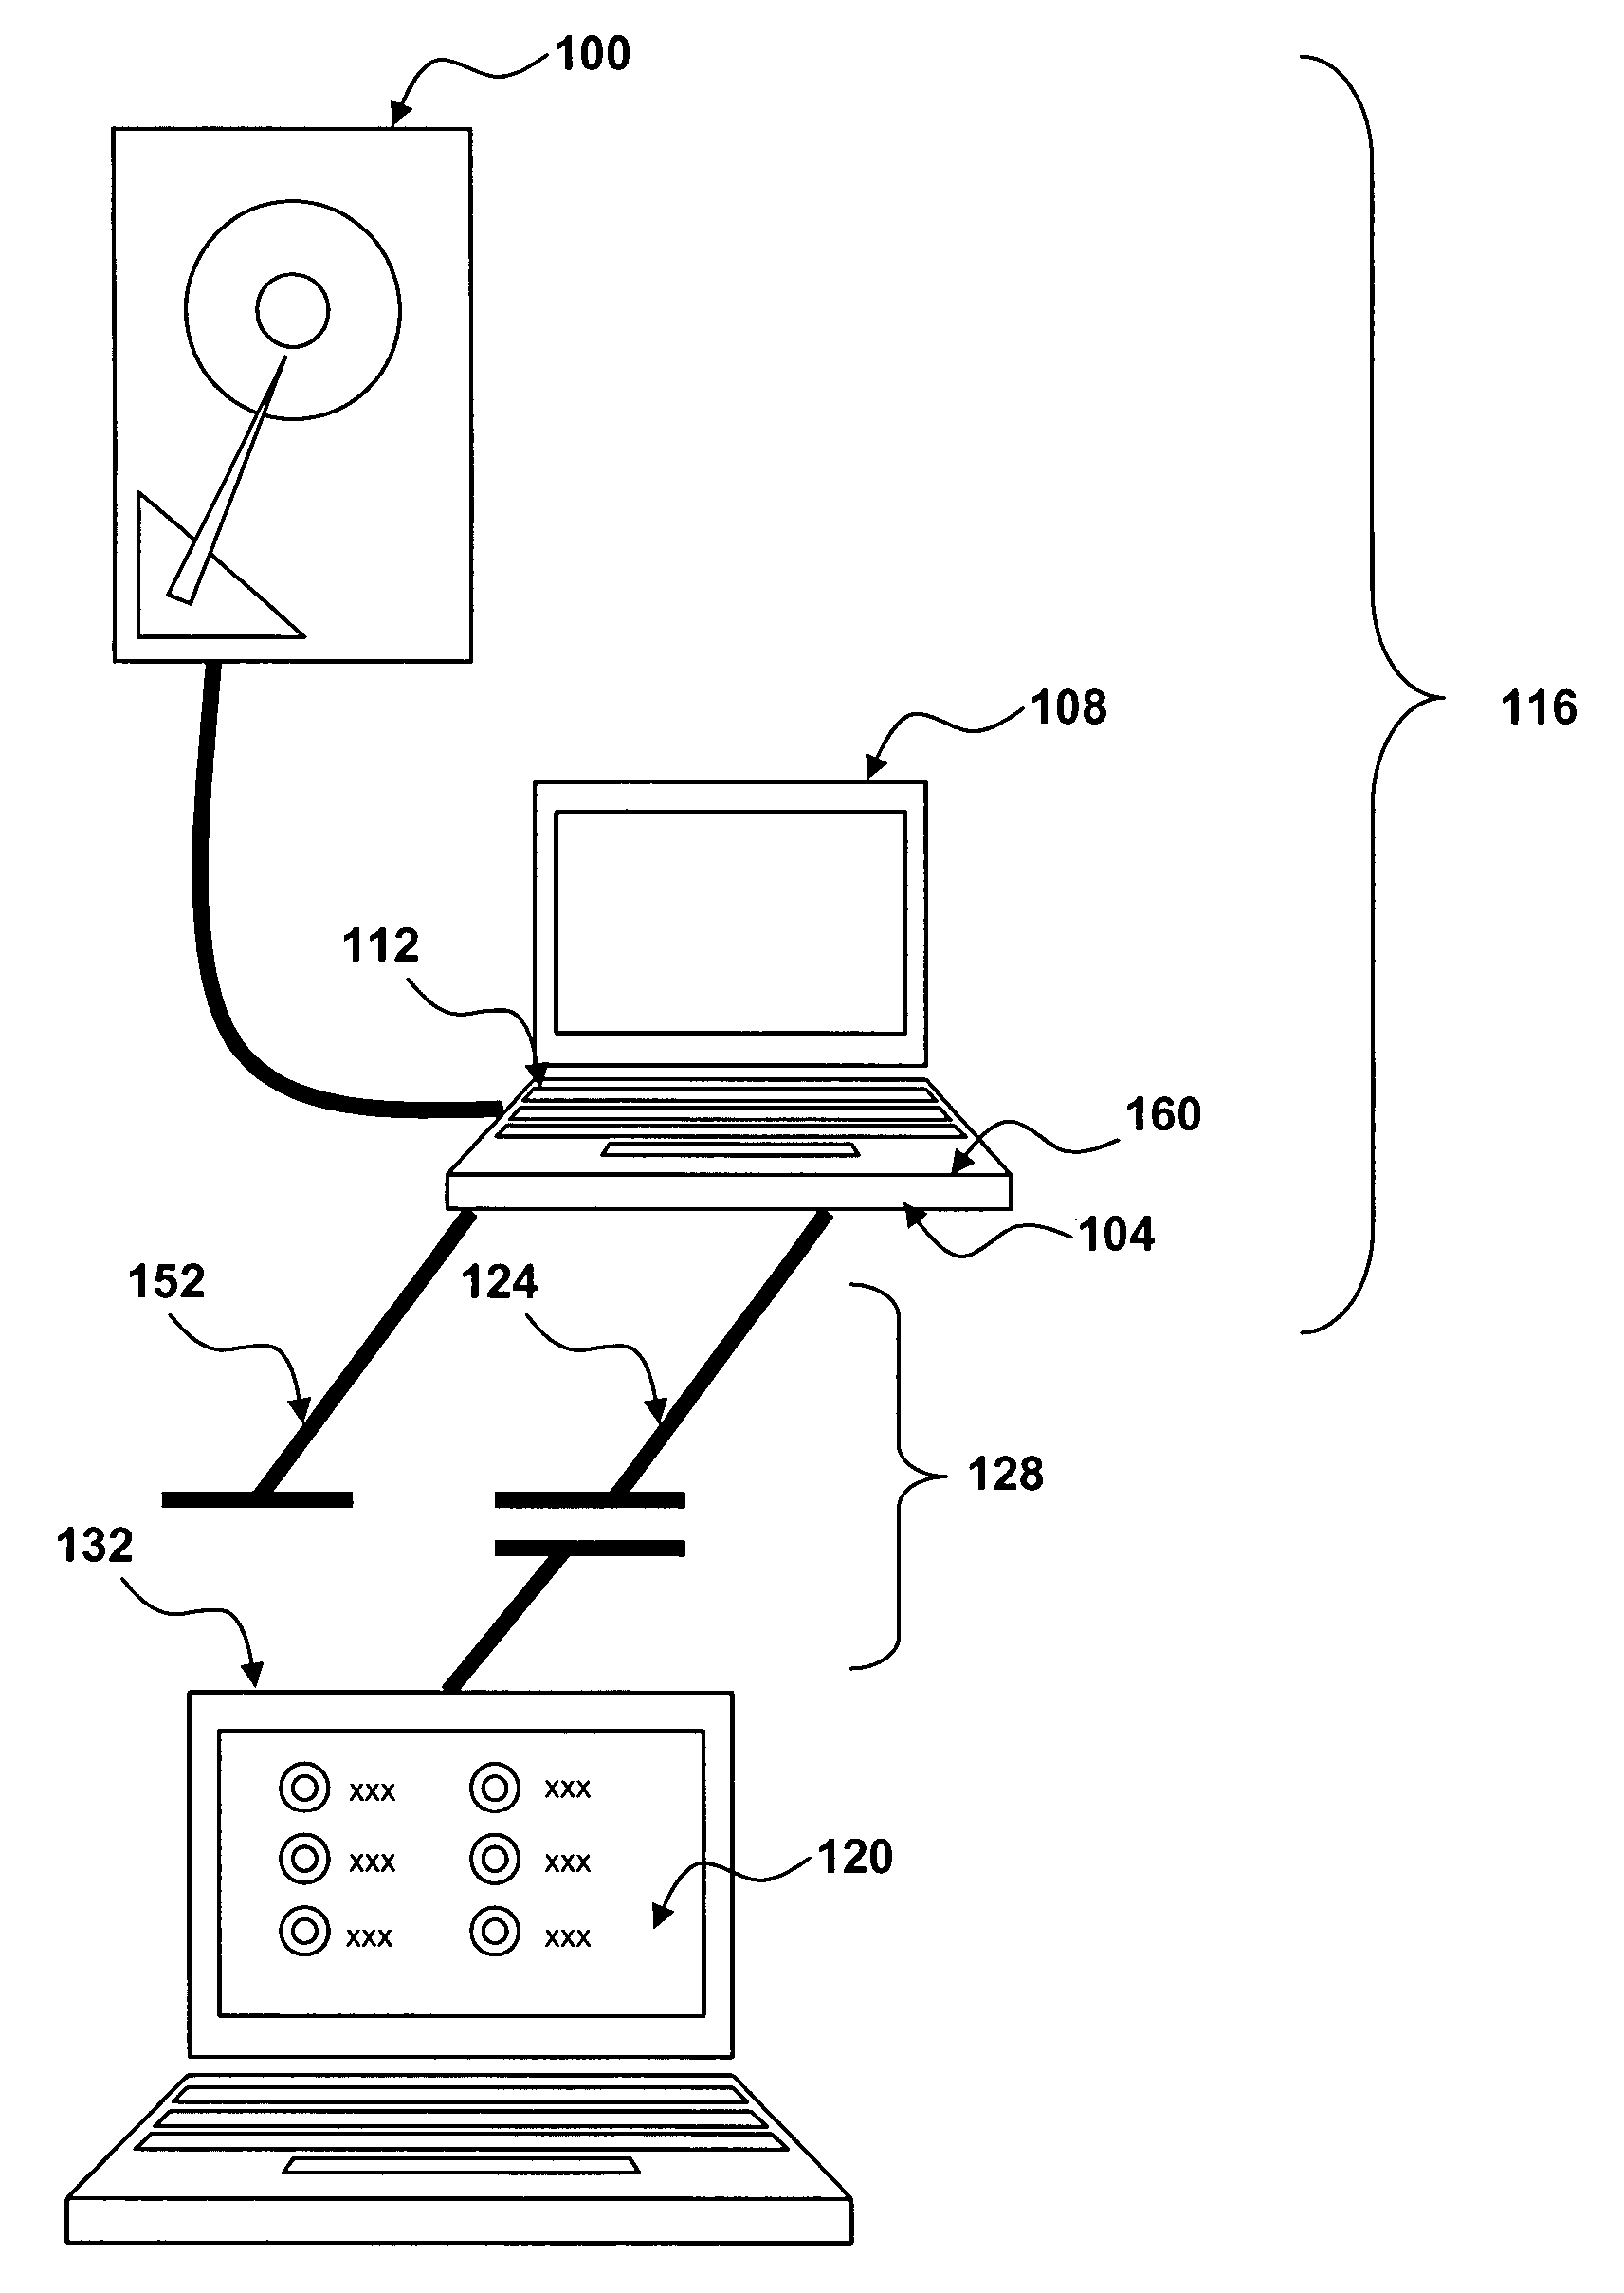 Systems and methods for survey scheduling and implementation